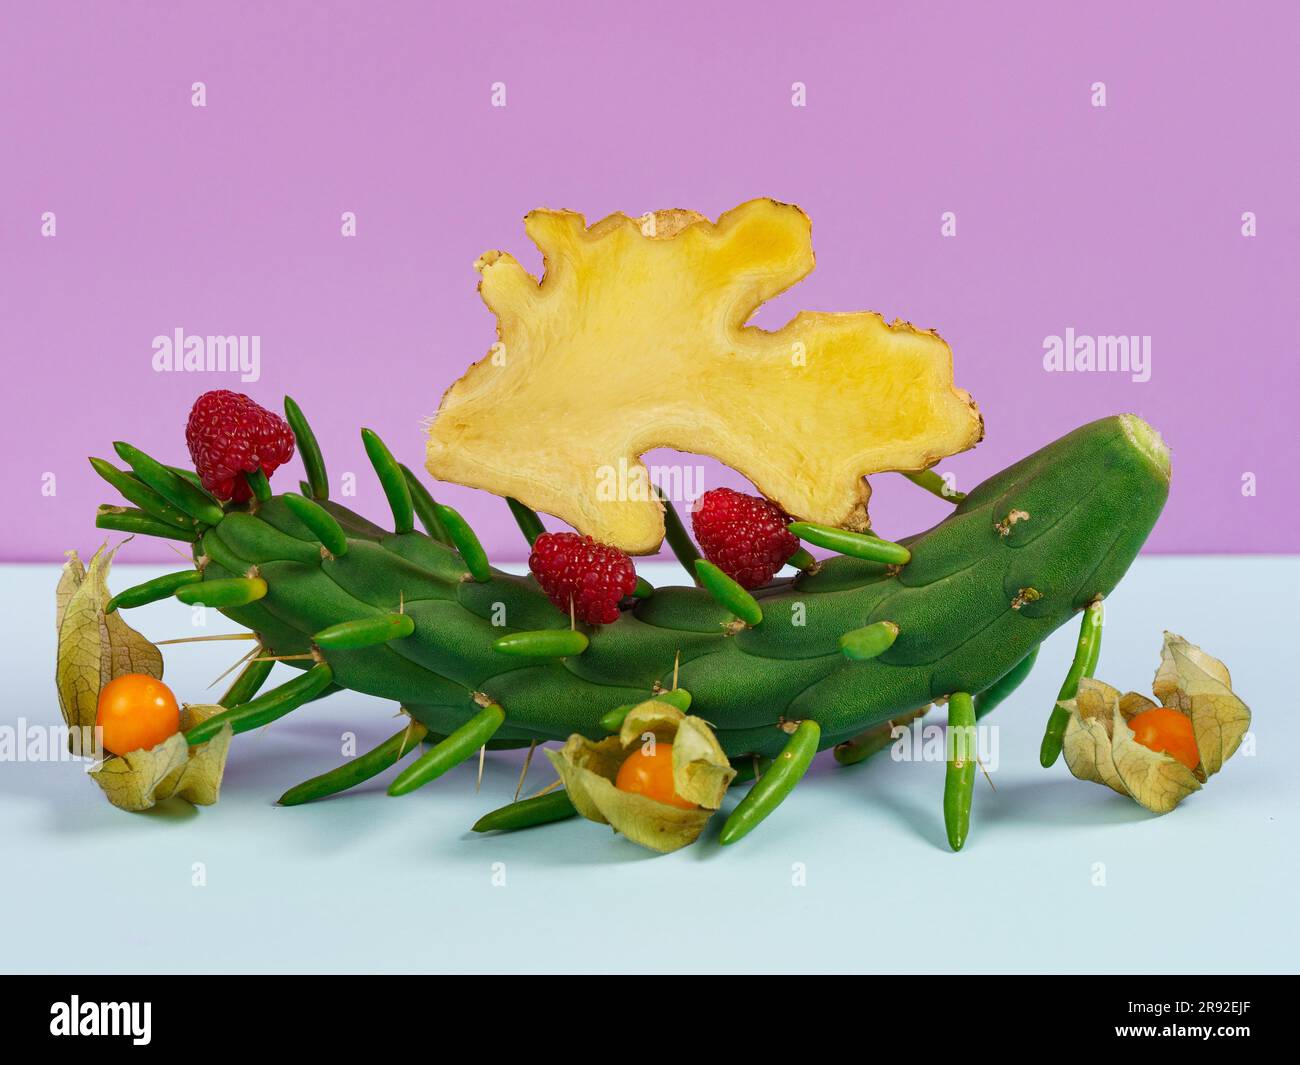 Berry still life with ginger on a cactus prickly pear subulata Stock Photo